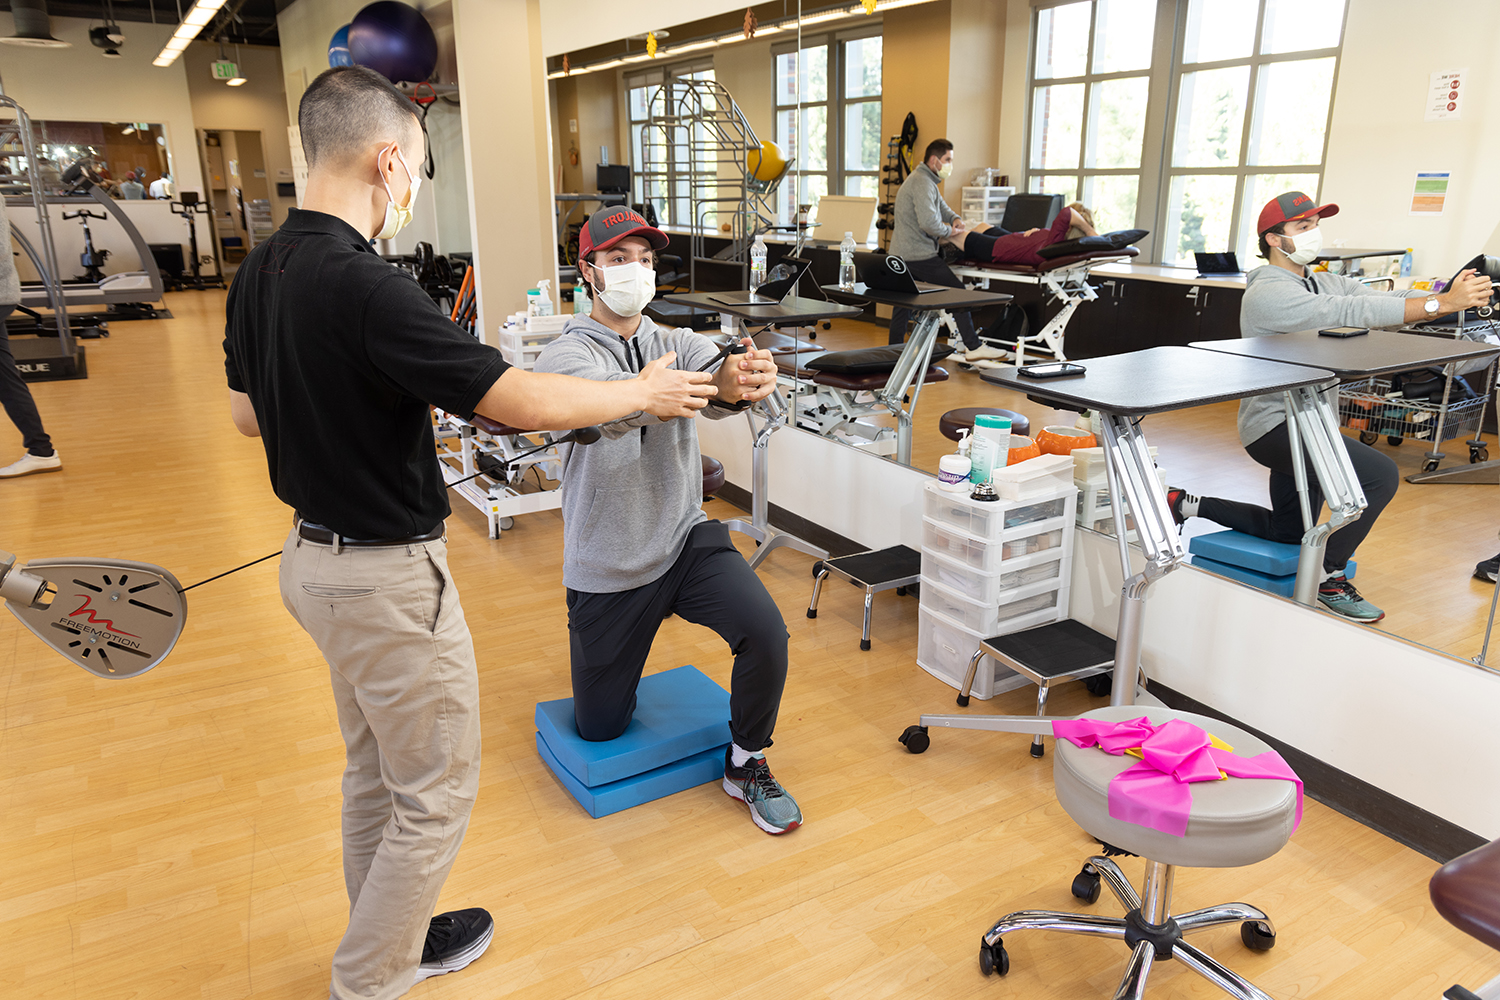 Alan Ng providing physical therapy treatment to a patient at USC Physical Therapy faculty practice